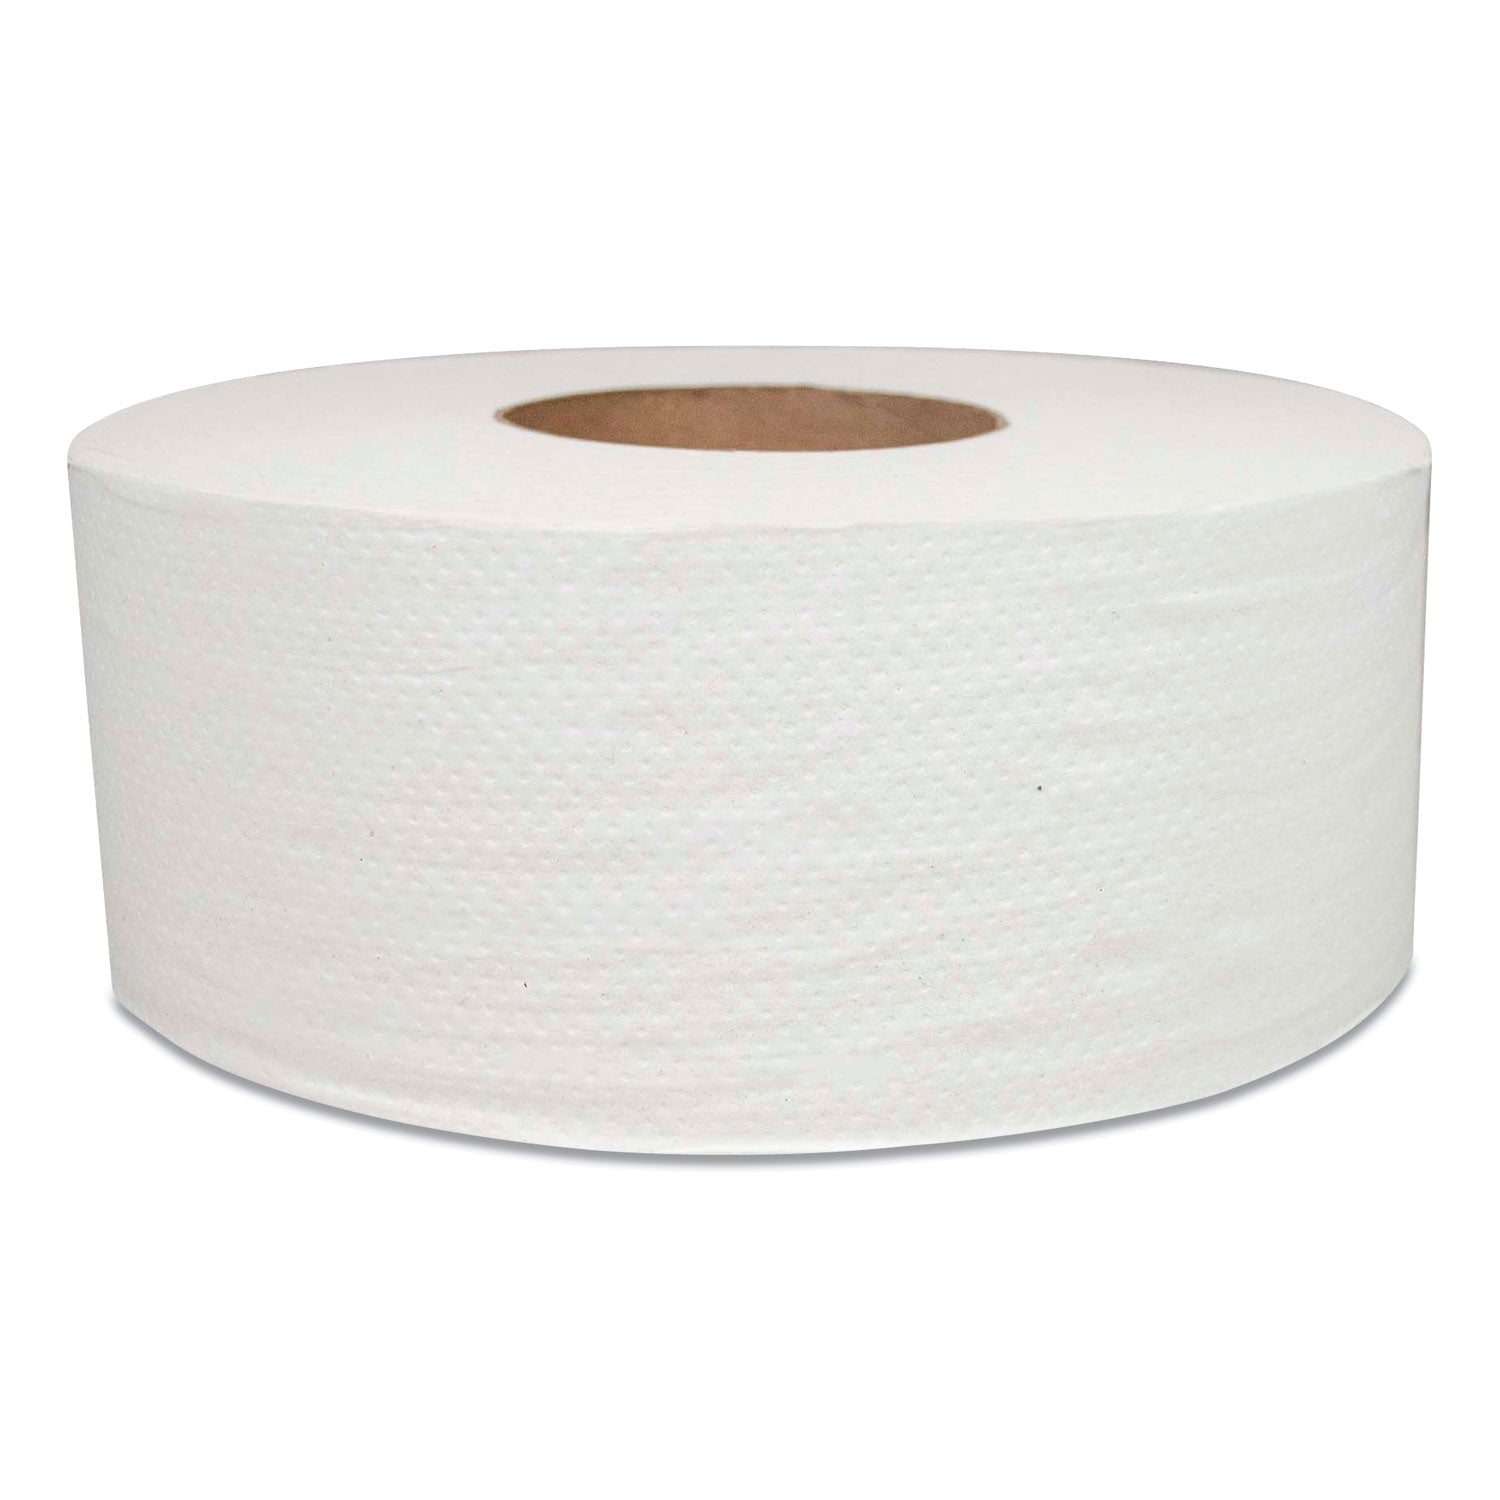 Boardwalk Two-Ply Toilet Tissue, Septic Safe, White, 4 X 3, 400 Sheets ...